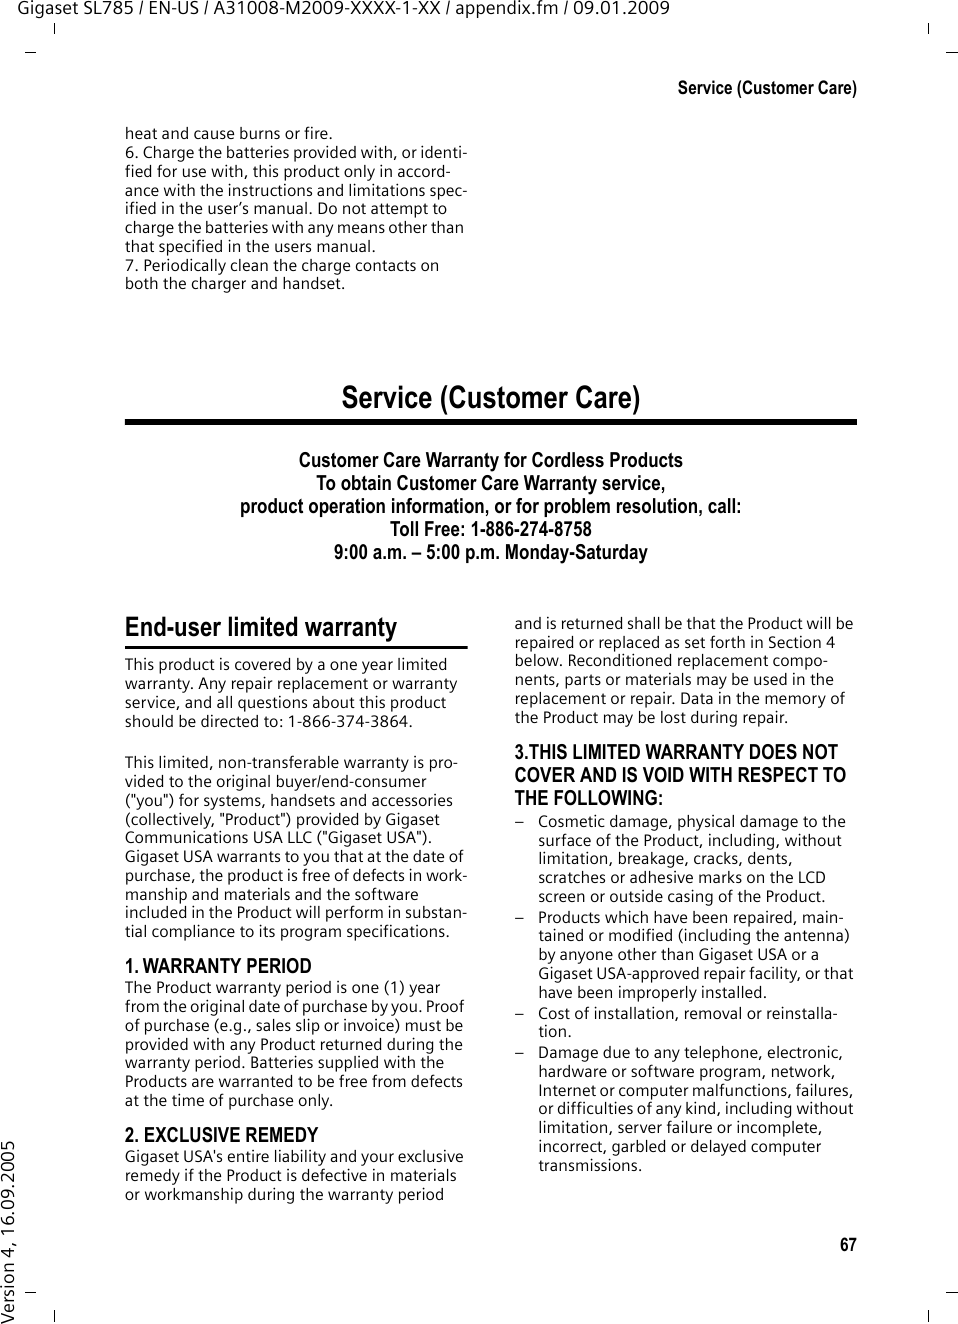 67Service (Customer Care)Gigaset SL785 / EN-US / A31008-M2009-XXXX-1-XX / appendix.fm / 09.01.2009Version 4, 16.09.2005heat and cause burns or fire.6. Charge the batteries provided with, or identi-fied for use with, this product only in accord-ance with the instructions and limitations spec-ified in the user’s manual. Do not attempt to charge the batteries with any means other than that specified in the users manual.7. Periodically clean the charge contacts on both the charger and handset.Service (Customer Care)Customer Care Warranty for Cordless ProductsTo obtain Customer Care Warranty service,product operation information, or for problem resolution, call:Toll Free: 1-886-274-87589:00 a.m. – 5:00 p.m. Monday-Saturday End-user limited warrantyThis product is covered by a one year limited warranty. Any repair replacement or warranty service, and all questions about this product should be directed to: 1-866-374-3864.This limited, non-transferable warranty is pro-vided to the original buyer/end-consumer (&quot;you&quot;) for systems, handsets and accessories (collectively, &quot;Product&quot;) provided by Gigaset Communications USA LLC (&quot;Gigaset USA&quot;). Gigaset USA warrants to you that at the date of purchase, the product is free of defects in work-manship and materials and the software included in the Product will perform in substan-tial compliance to its program specifications.1. WARRANTY PERIODThe Product warranty period is one (1) year from the original date of purchase by you. Proof of purchase (e.g., sales slip or invoice) must be provided with any Product returned during the warranty period. Batteries supplied with the Products are warranted to be free from defects at the time of purchase only.2. EXCLUSIVE REMEDY Gigaset USA&apos;s entire liability and your exclusive remedy if the Product is defective in materials or workmanship during the warranty period and is returned shall be that the Product will be repaired or replaced as set forth in Section 4 below. Reconditioned replacement compo-nents, parts or materials may be used in the replacement or repair. Data in the memory of the Product may be lost during repair.3.THIS LIMITED WARRANTY DOES NOT COVER AND IS VOID WITH RESPECT TO THE FOLLOWING:– Cosmetic damage, physical damage to the surface of the Product, including, without limitation, breakage, cracks, dents, scratches or adhesive marks on the LCD screen or outside casing of the Product.– Products which have been repaired, main-tained or modified (including the antenna) by anyone other than Gigaset USA or a Gigaset USA-approved repair facility, or that have been improperly installed.– Cost of installation, removal or reinstalla-tion.– Damage due to any telephone, electronic, hardware or software program, network, Internet or computer malfunctions, failures, or difficulties of any kind, including without limitation, server failure or incomplete, incorrect, garbled or delayed computer transmissions.